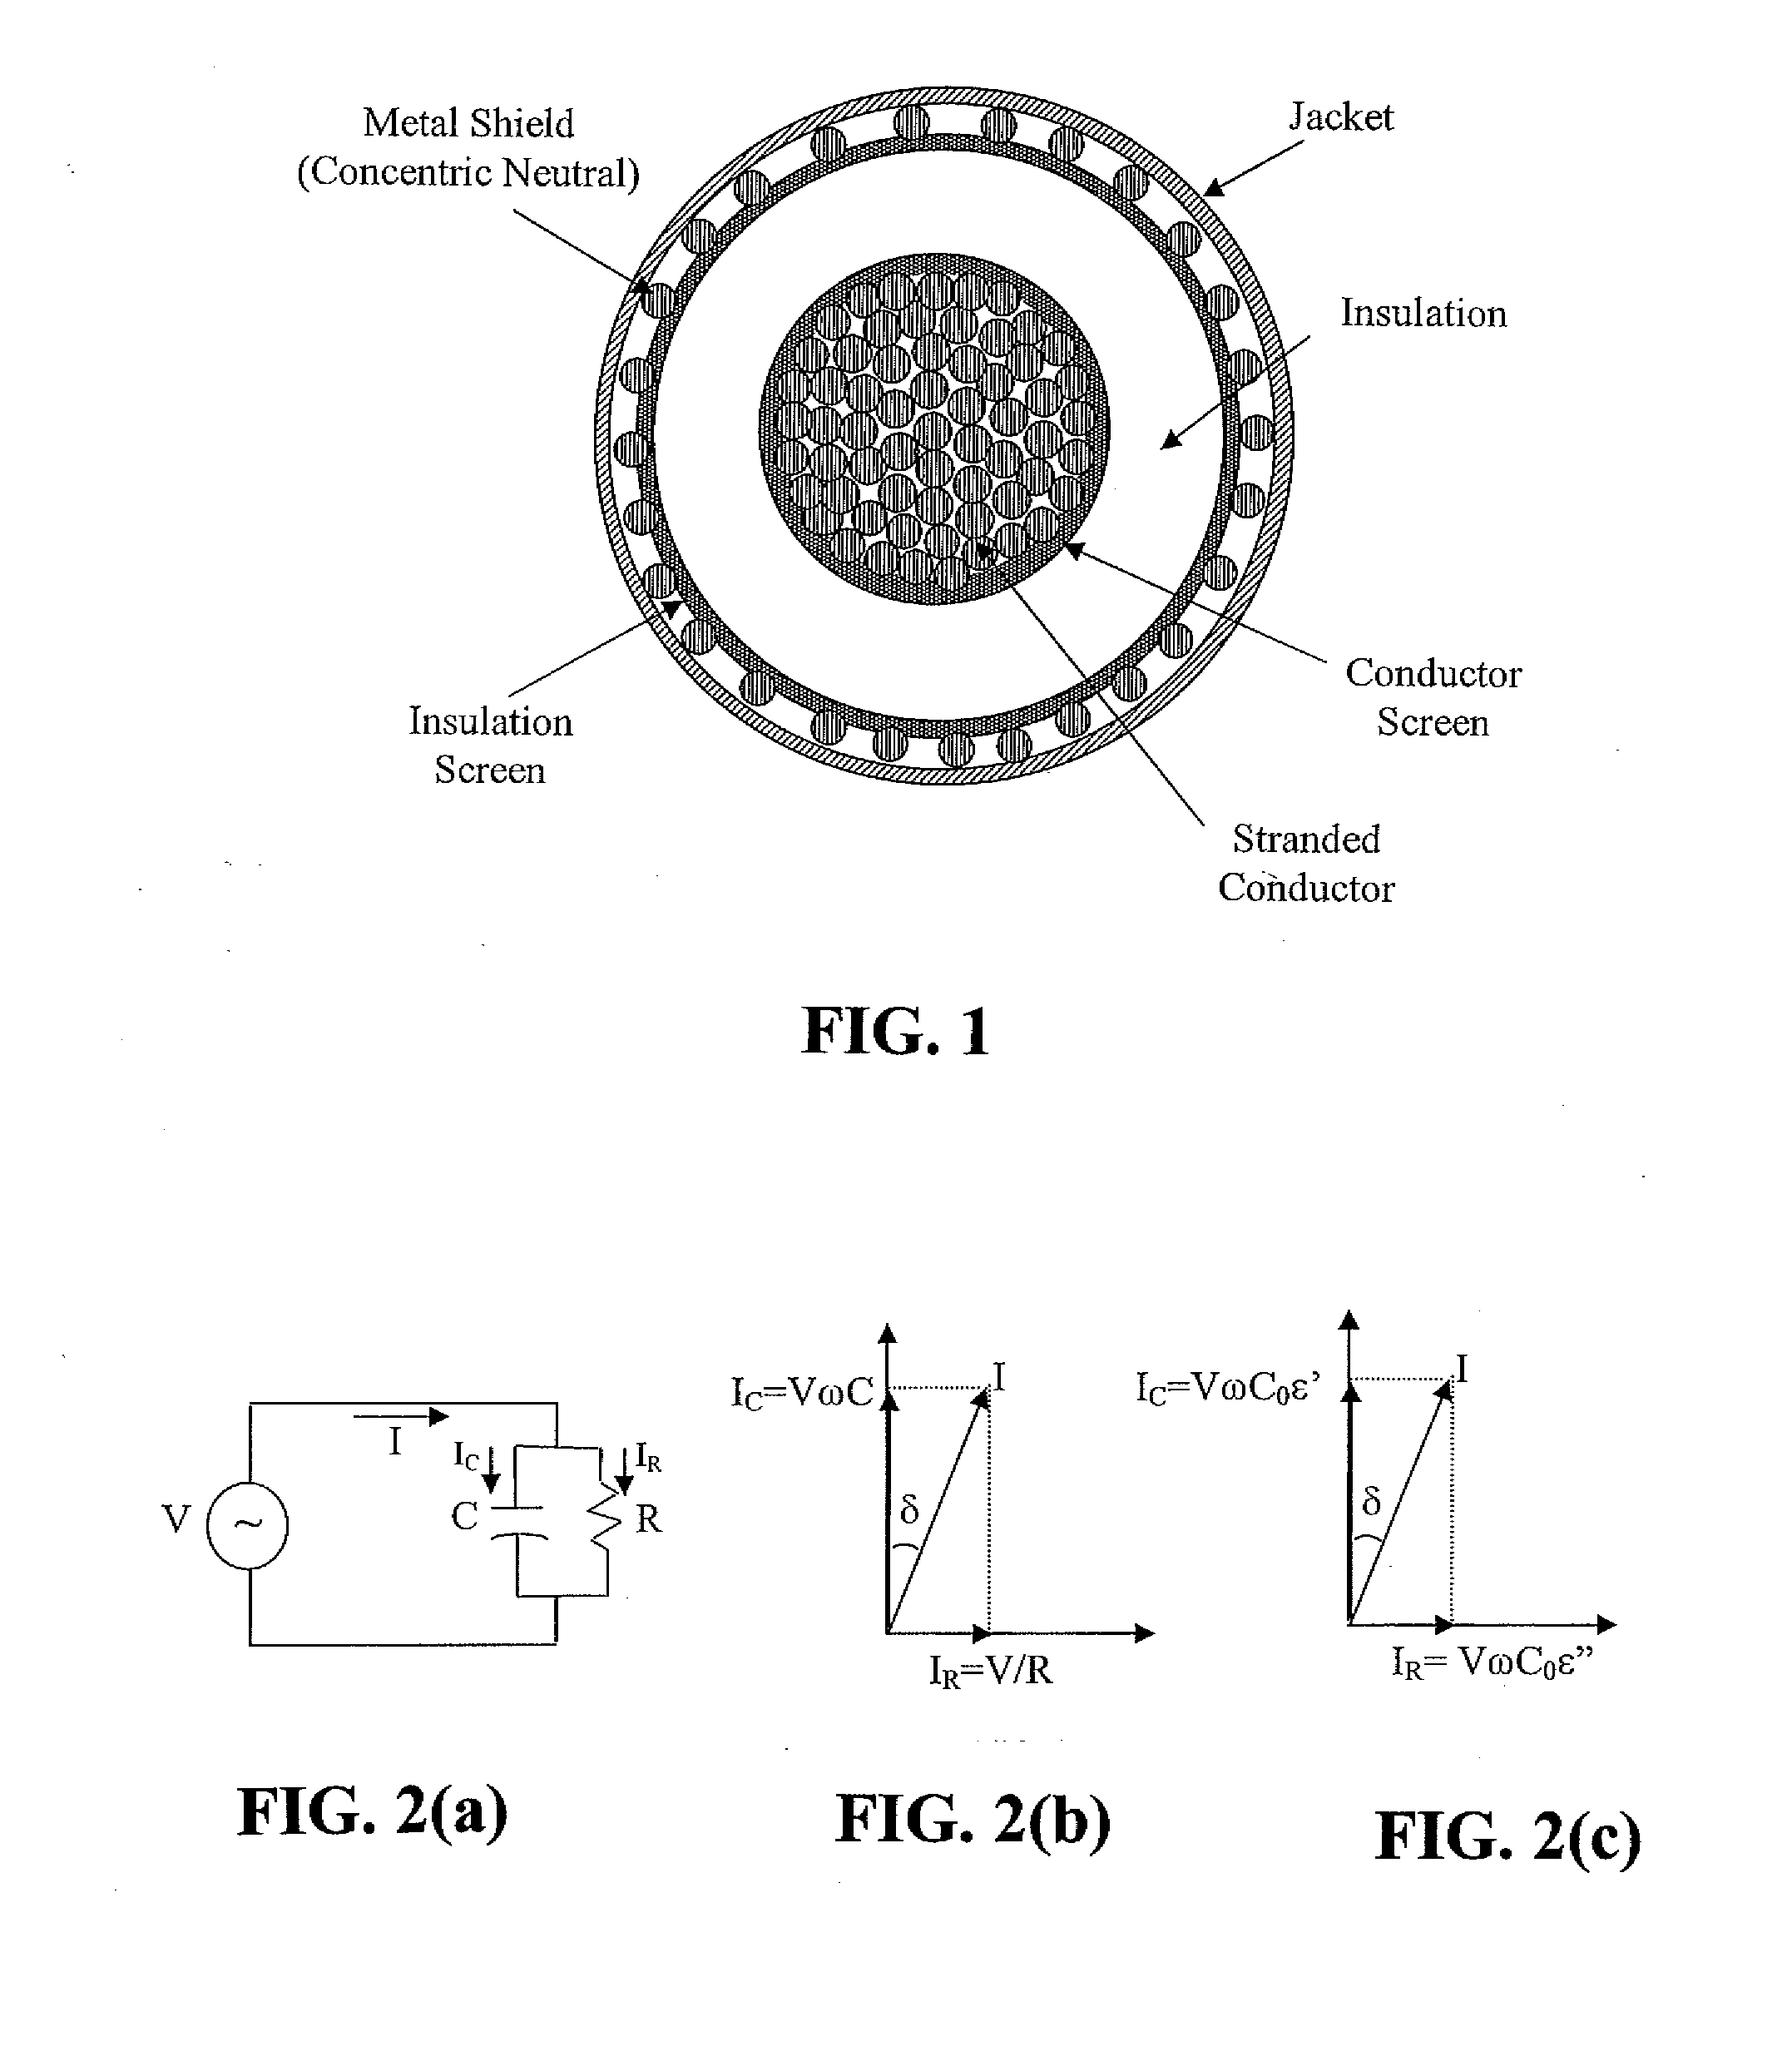 Diagnostic methods for electrical cables utilizing axial tomography